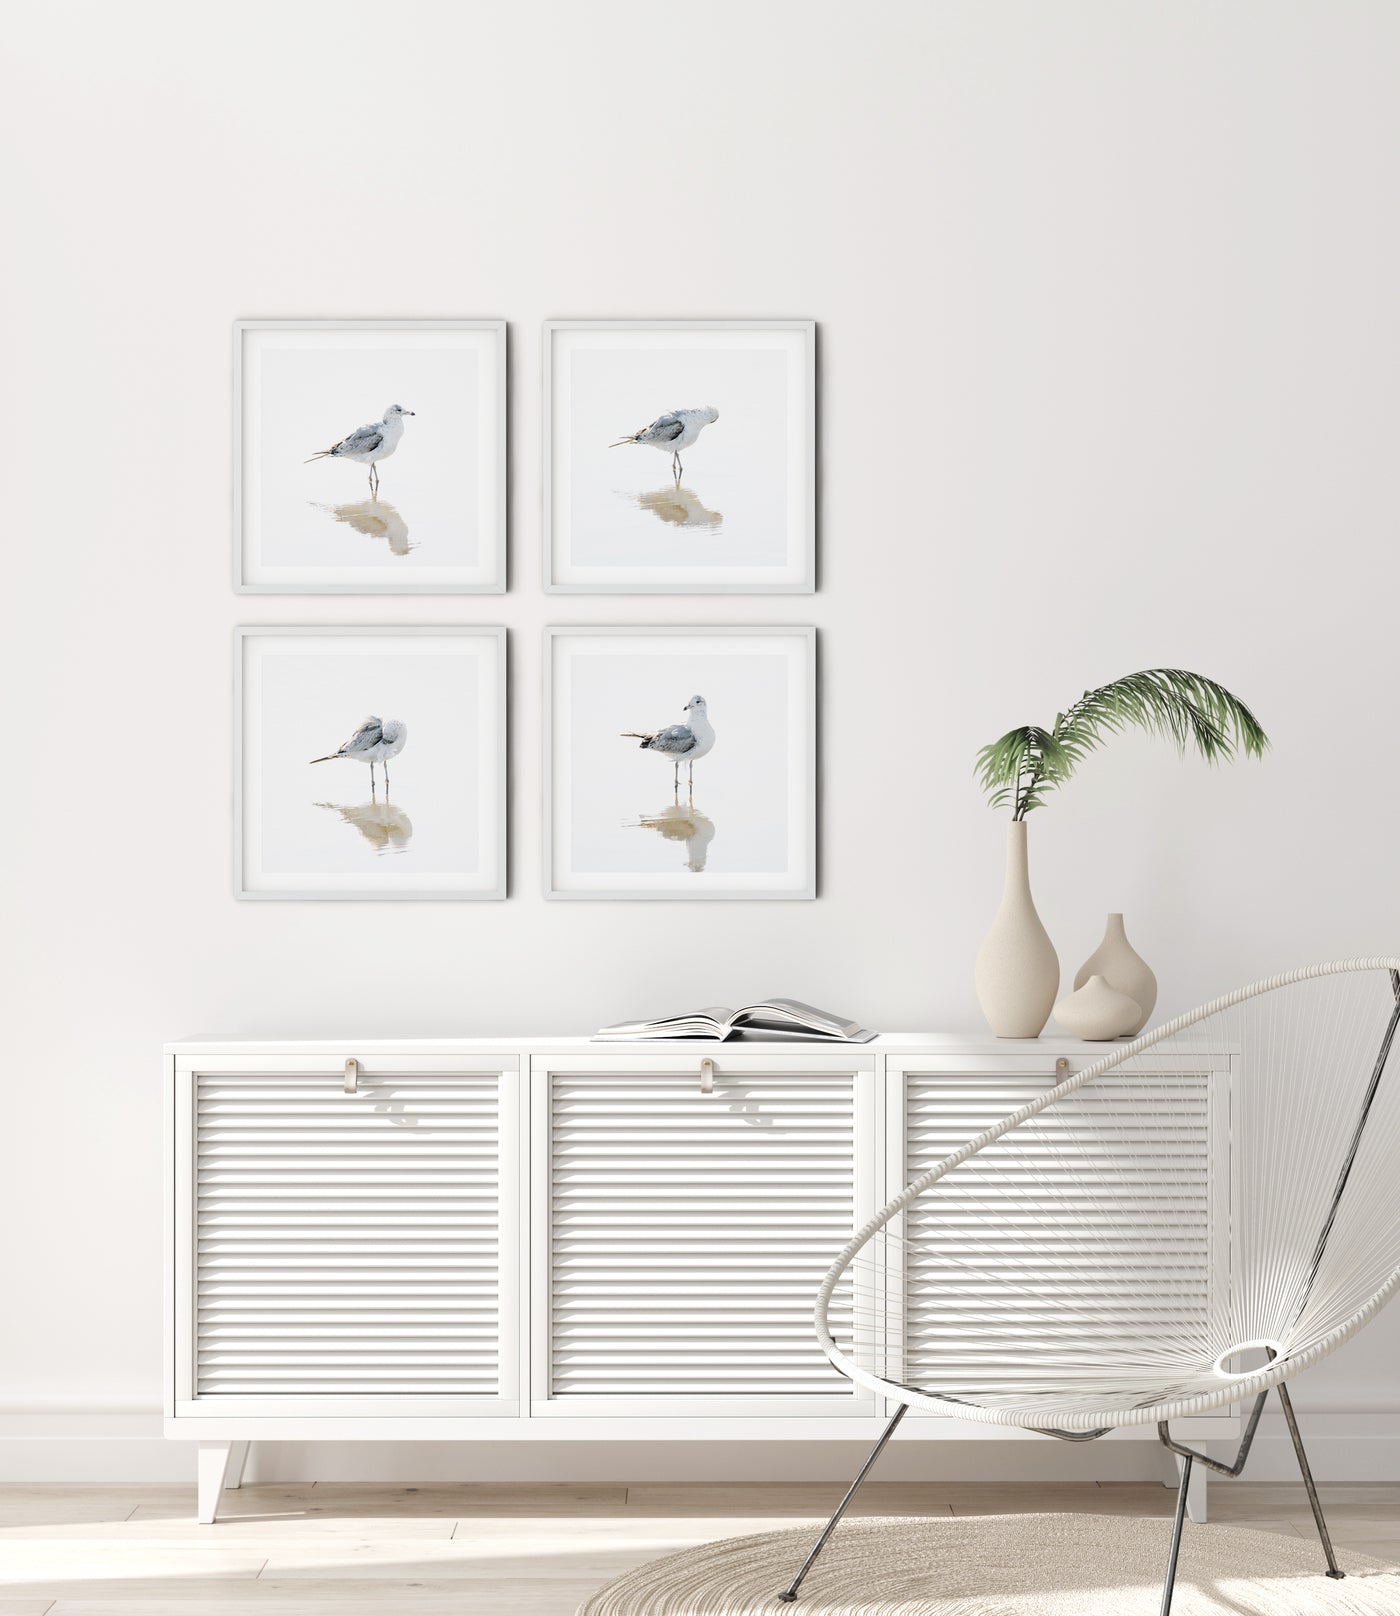 Seagulls - Set of 4 fine art prints by Cattie Coyle Photography